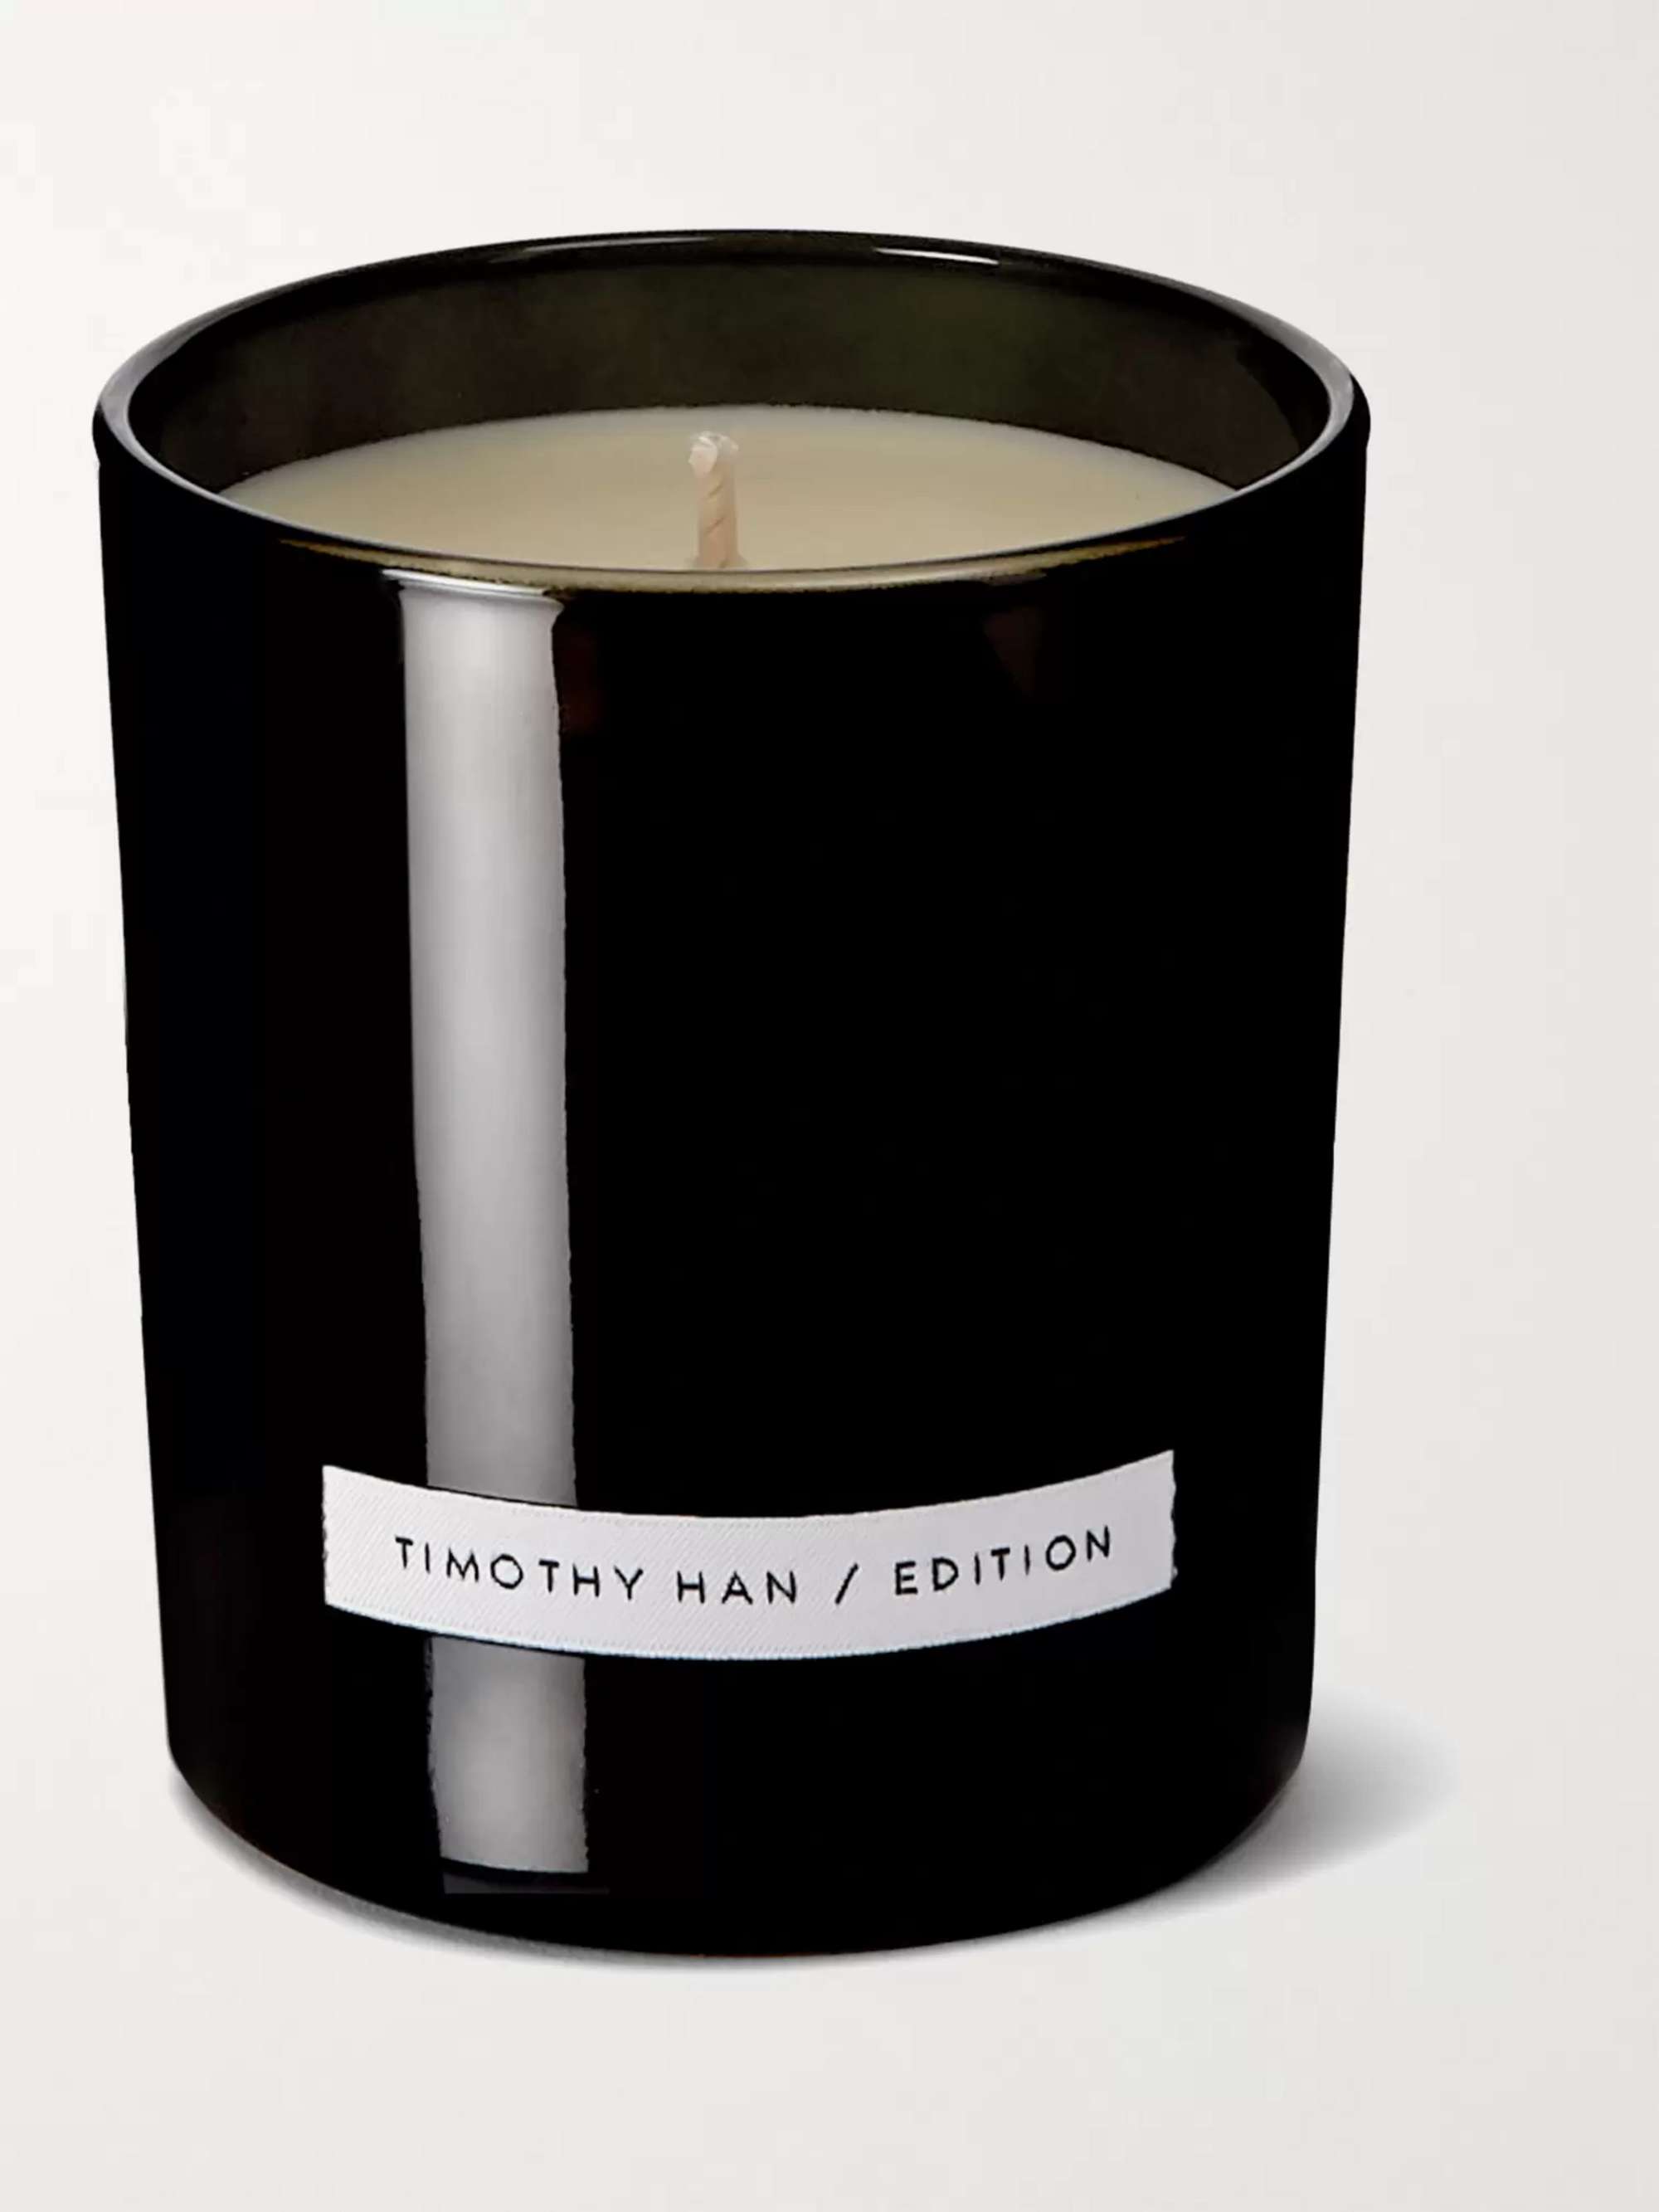 TIMOTHY HAN / EDITION She Came to Stay Scented Candle, 220g